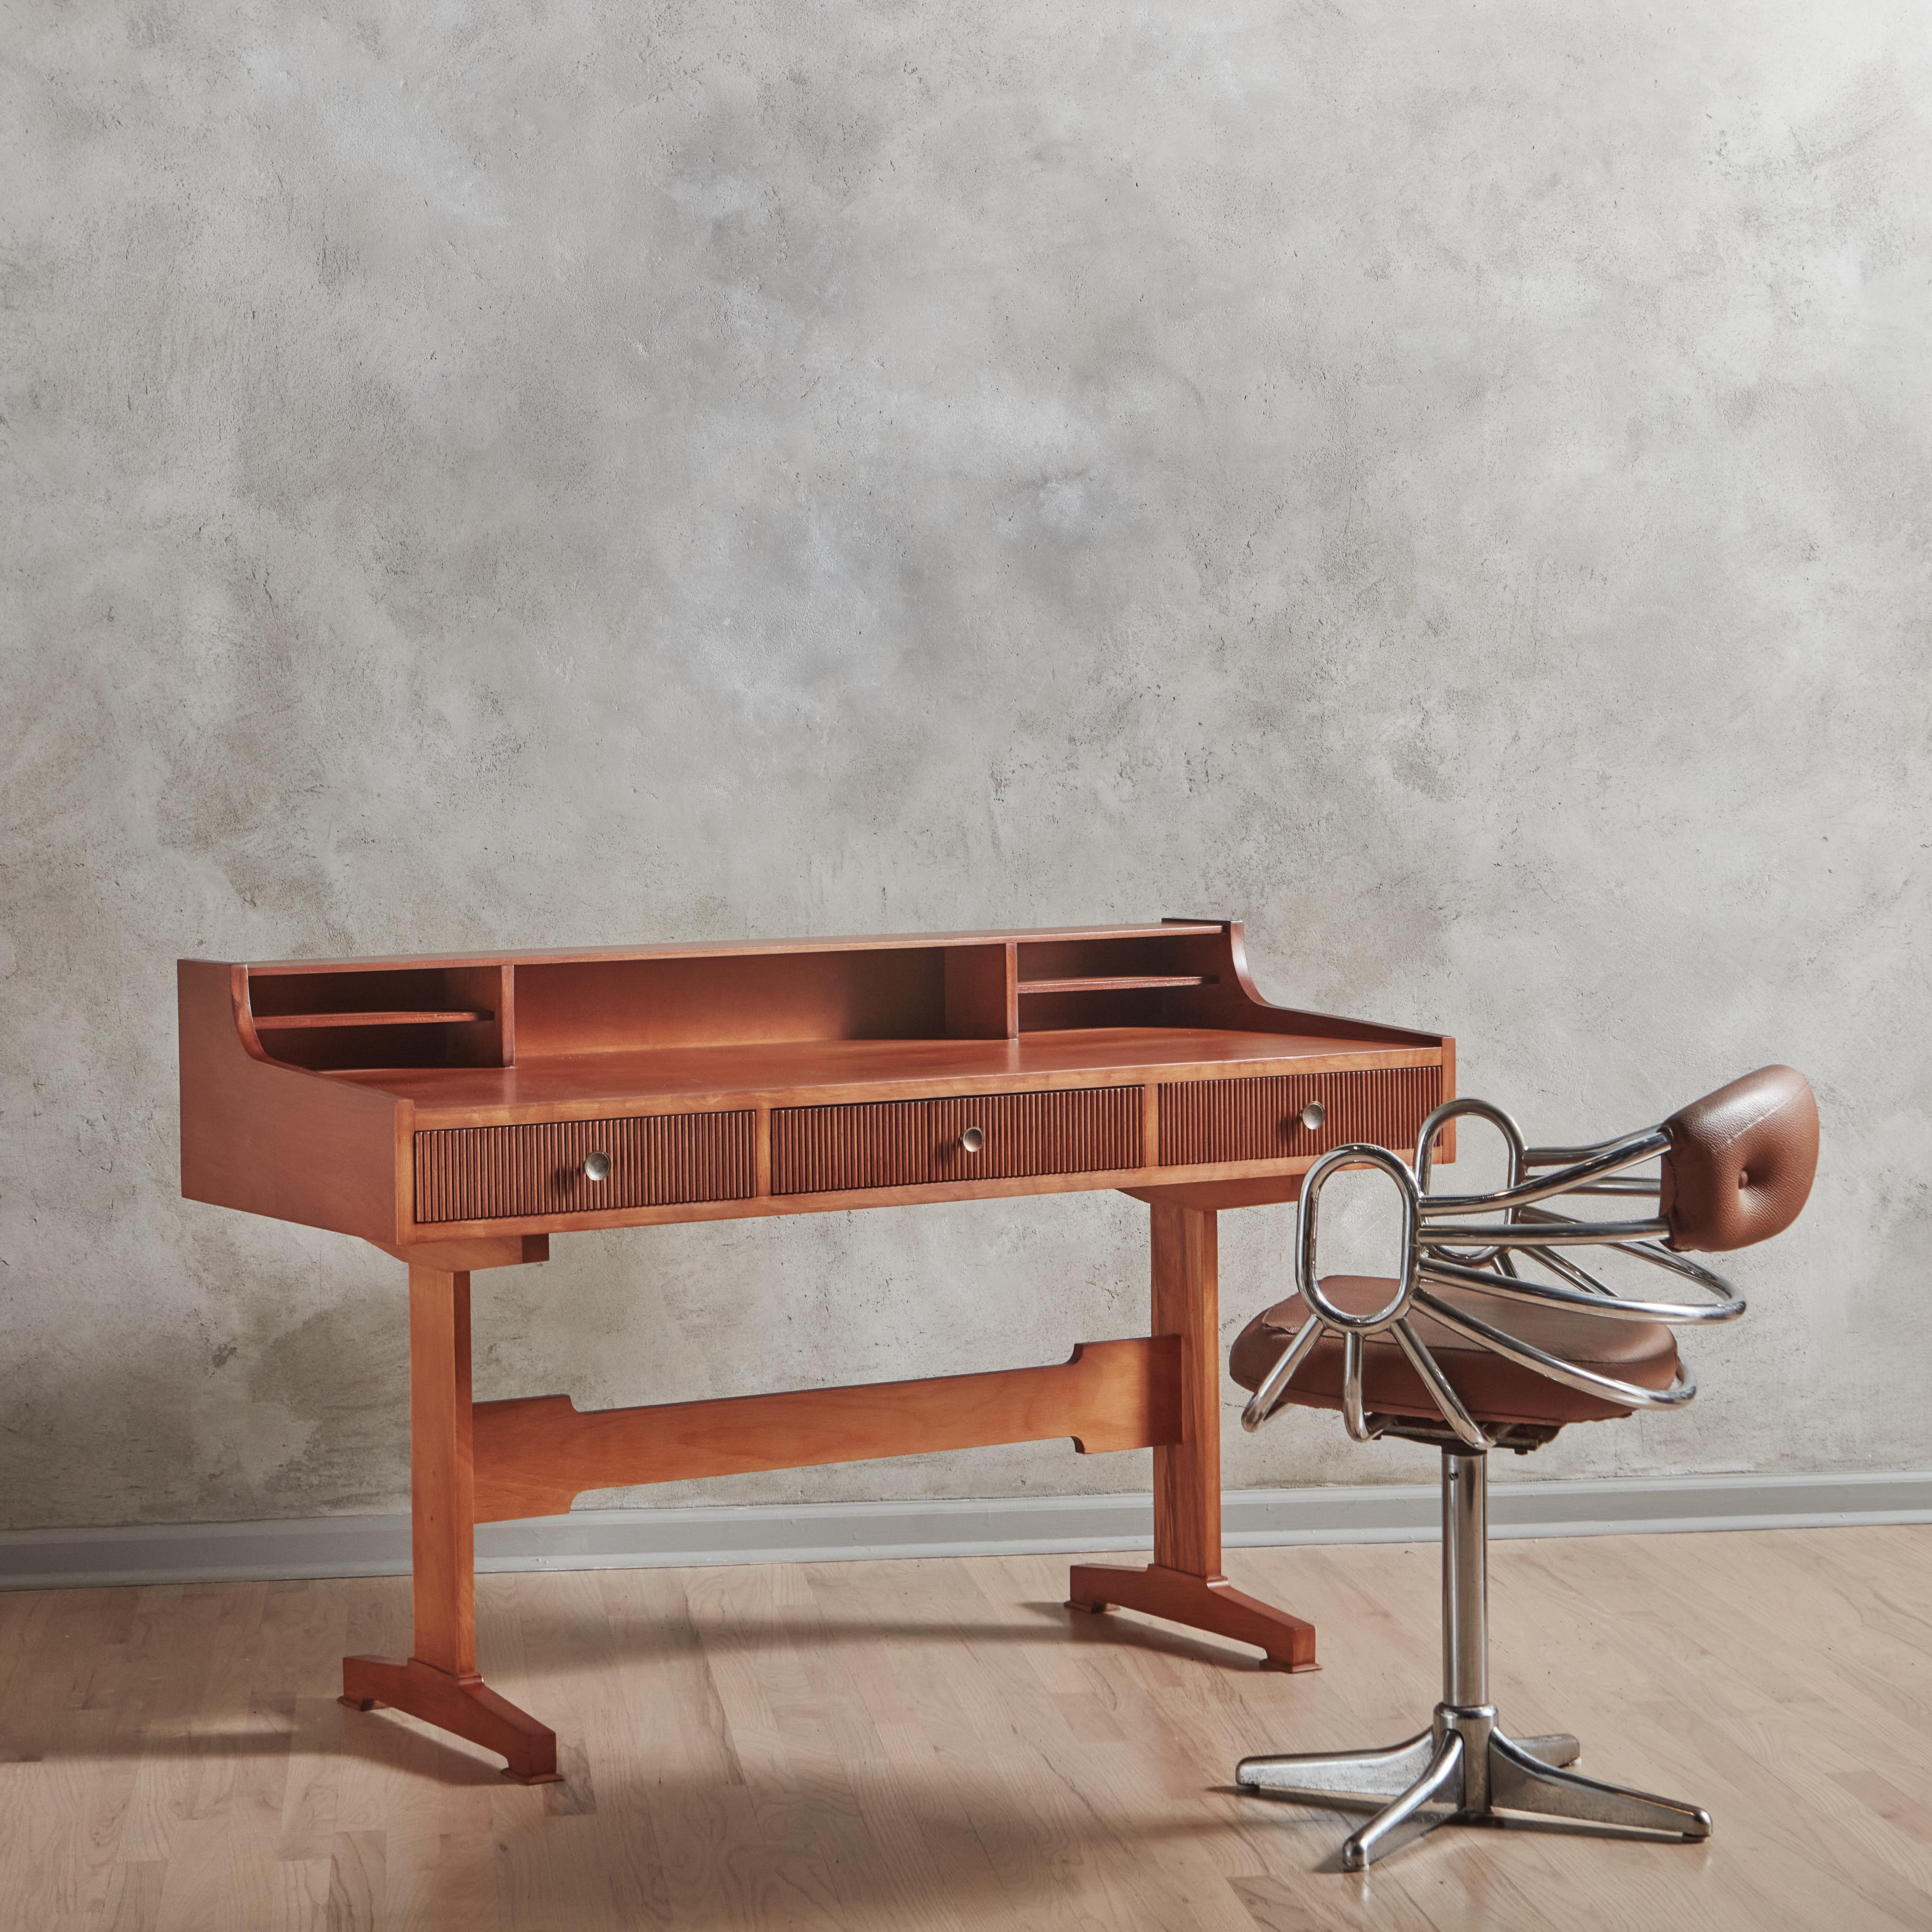 Fluted Beechwood Writing Desk in the Style of Gianfranco Frattini, Italy 1950s

The double footed legs is reminiscent of Frattini’s lines. The “grissinato” technique (in front of the drawers) is a mesmerizing and typical 1950’s Italian detail that